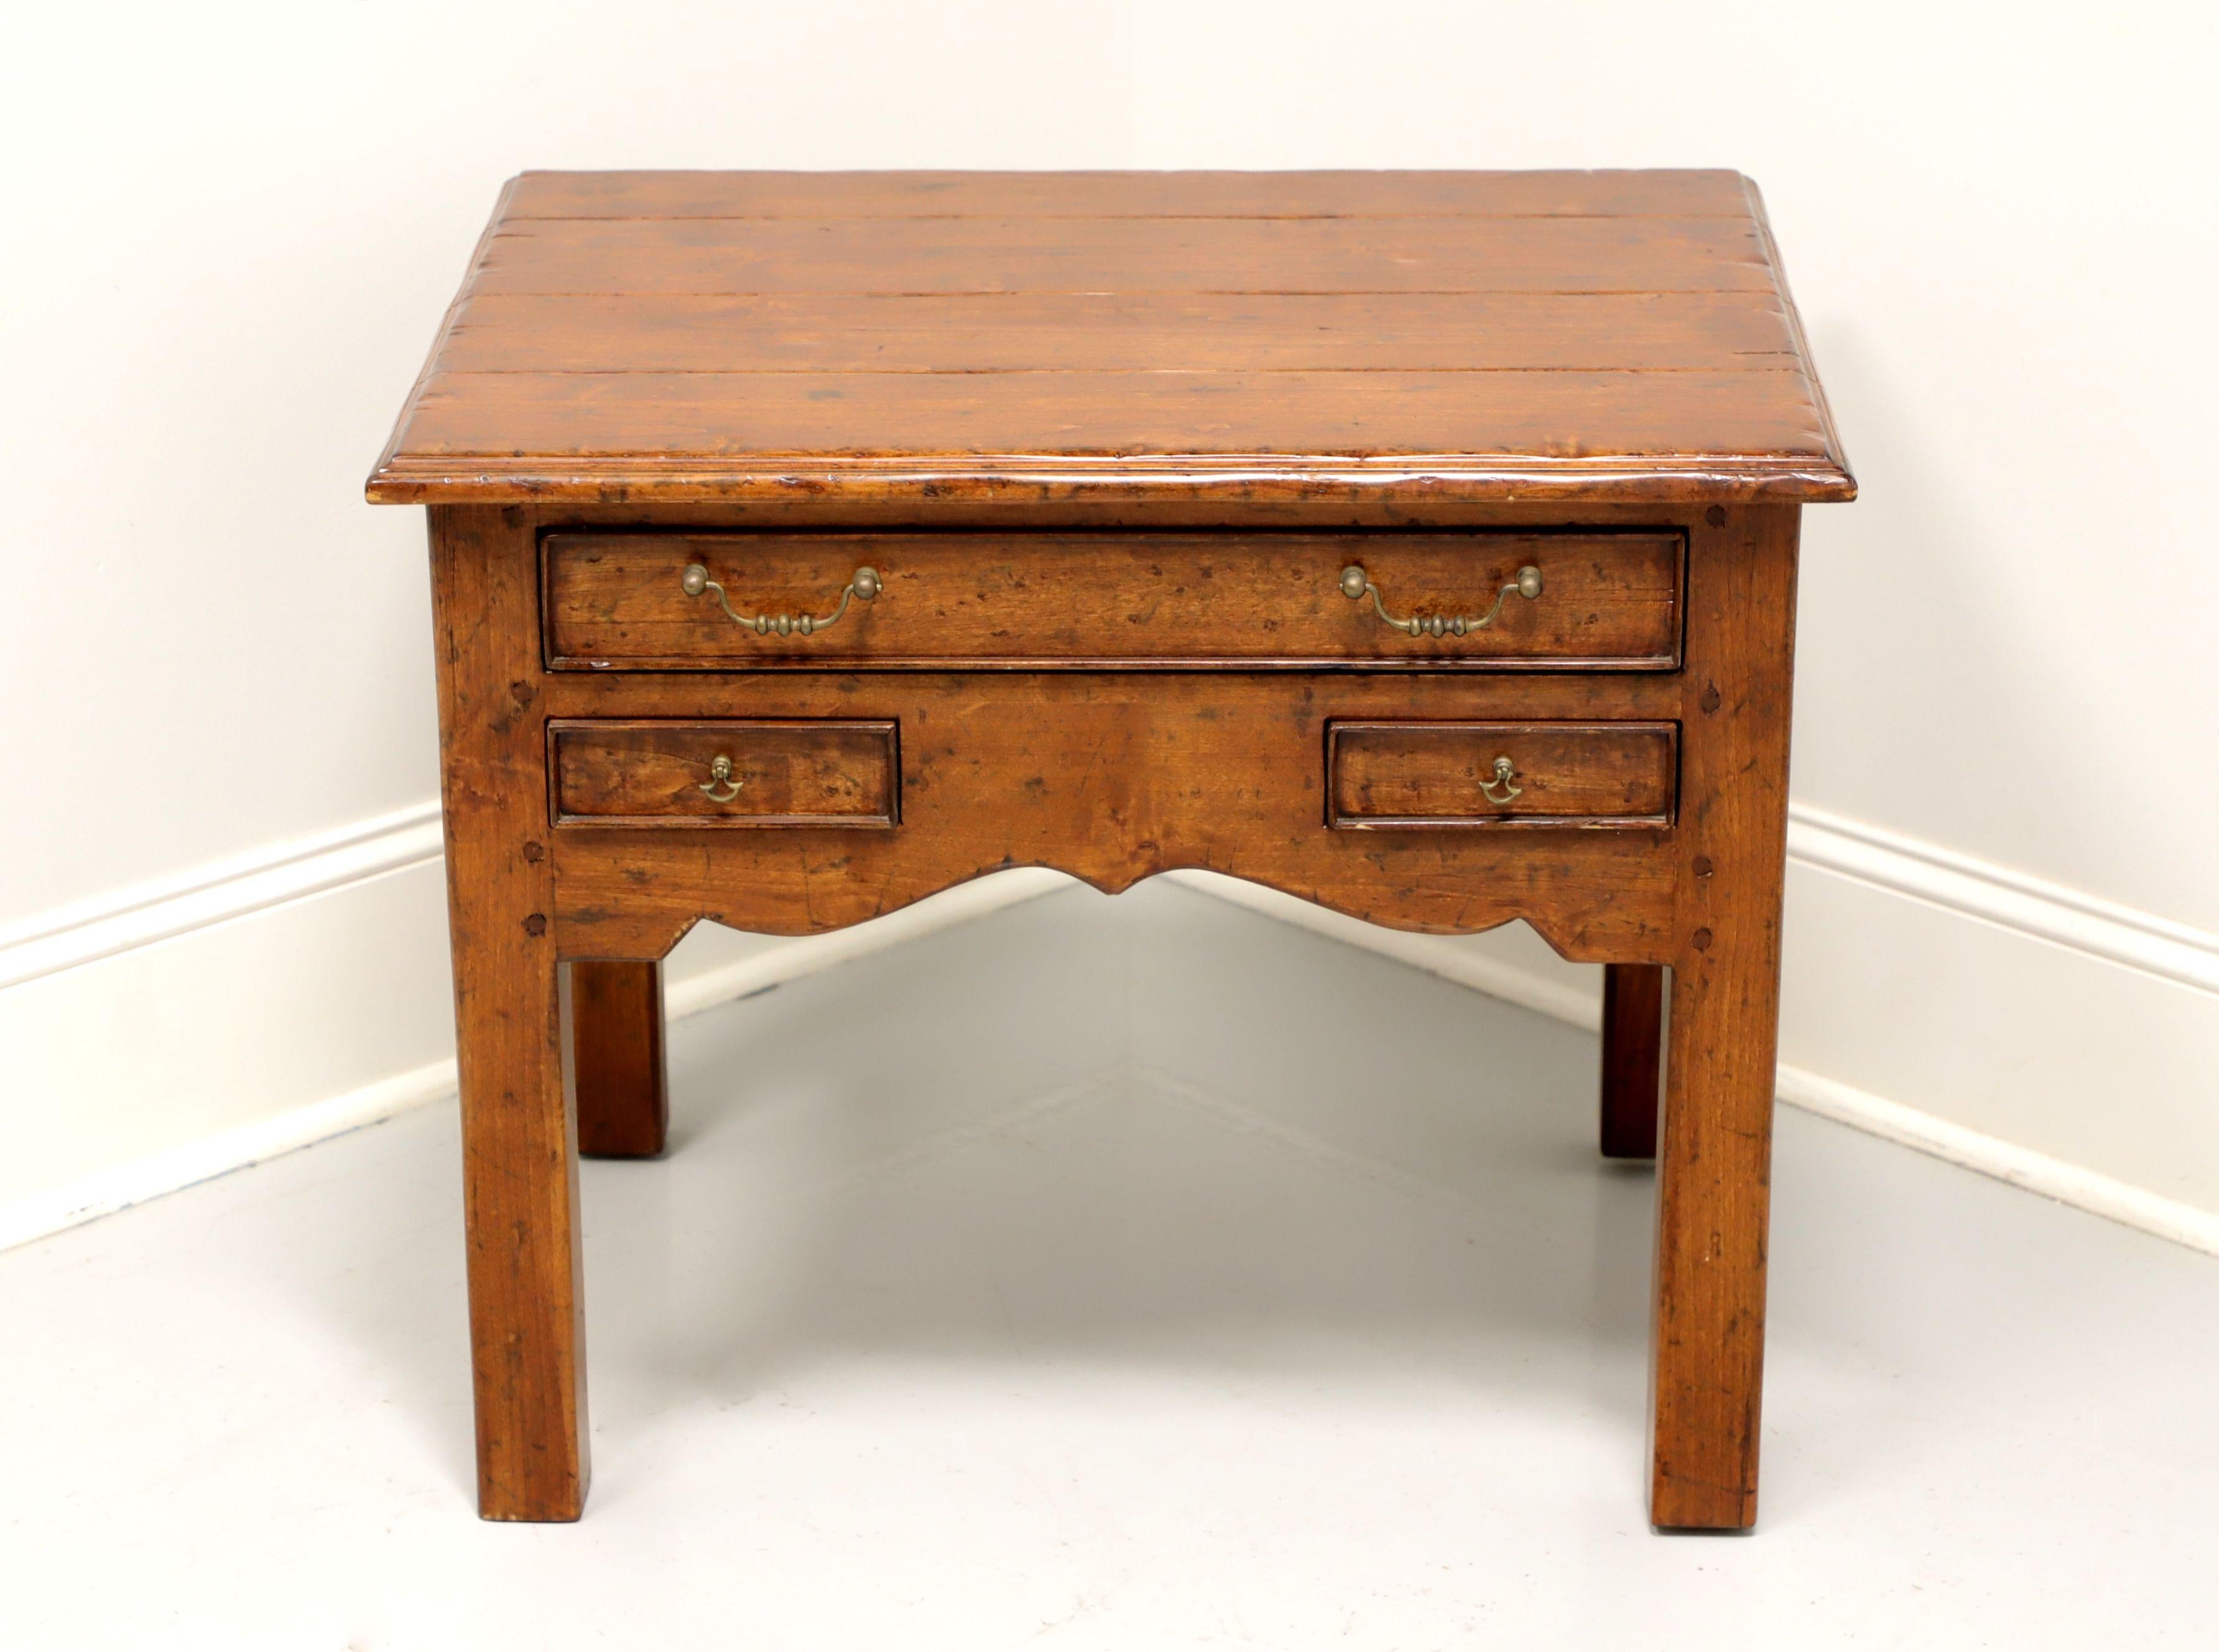 A Cottage Rustic style side table, unbranded, similar quality to Century Furniture. Walnut with a distressed finish, plank style top, brass hardware, carved apron and straight legs. Features one larger over two smaller dovetailed drawers. Made in